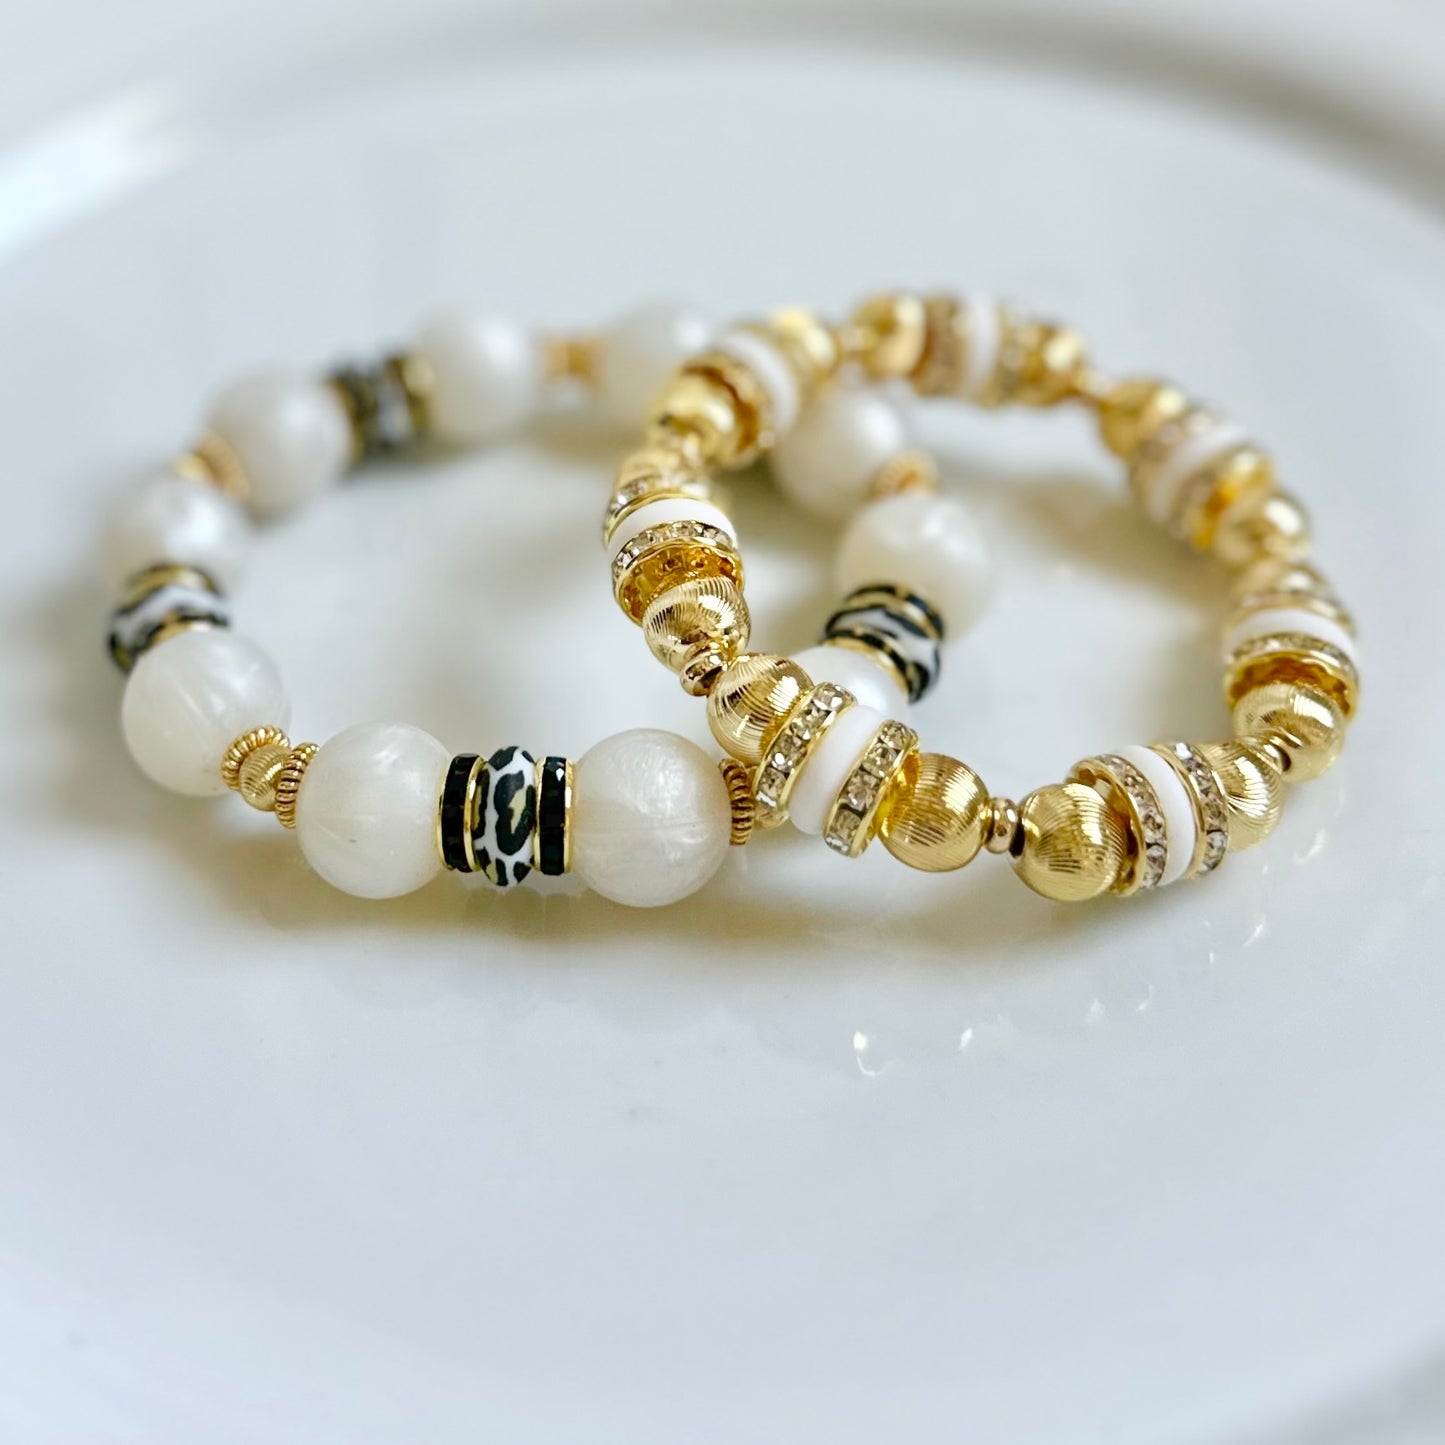 PEARLIZED IVORY WITH CHEETAH AND CZ ACCENTS